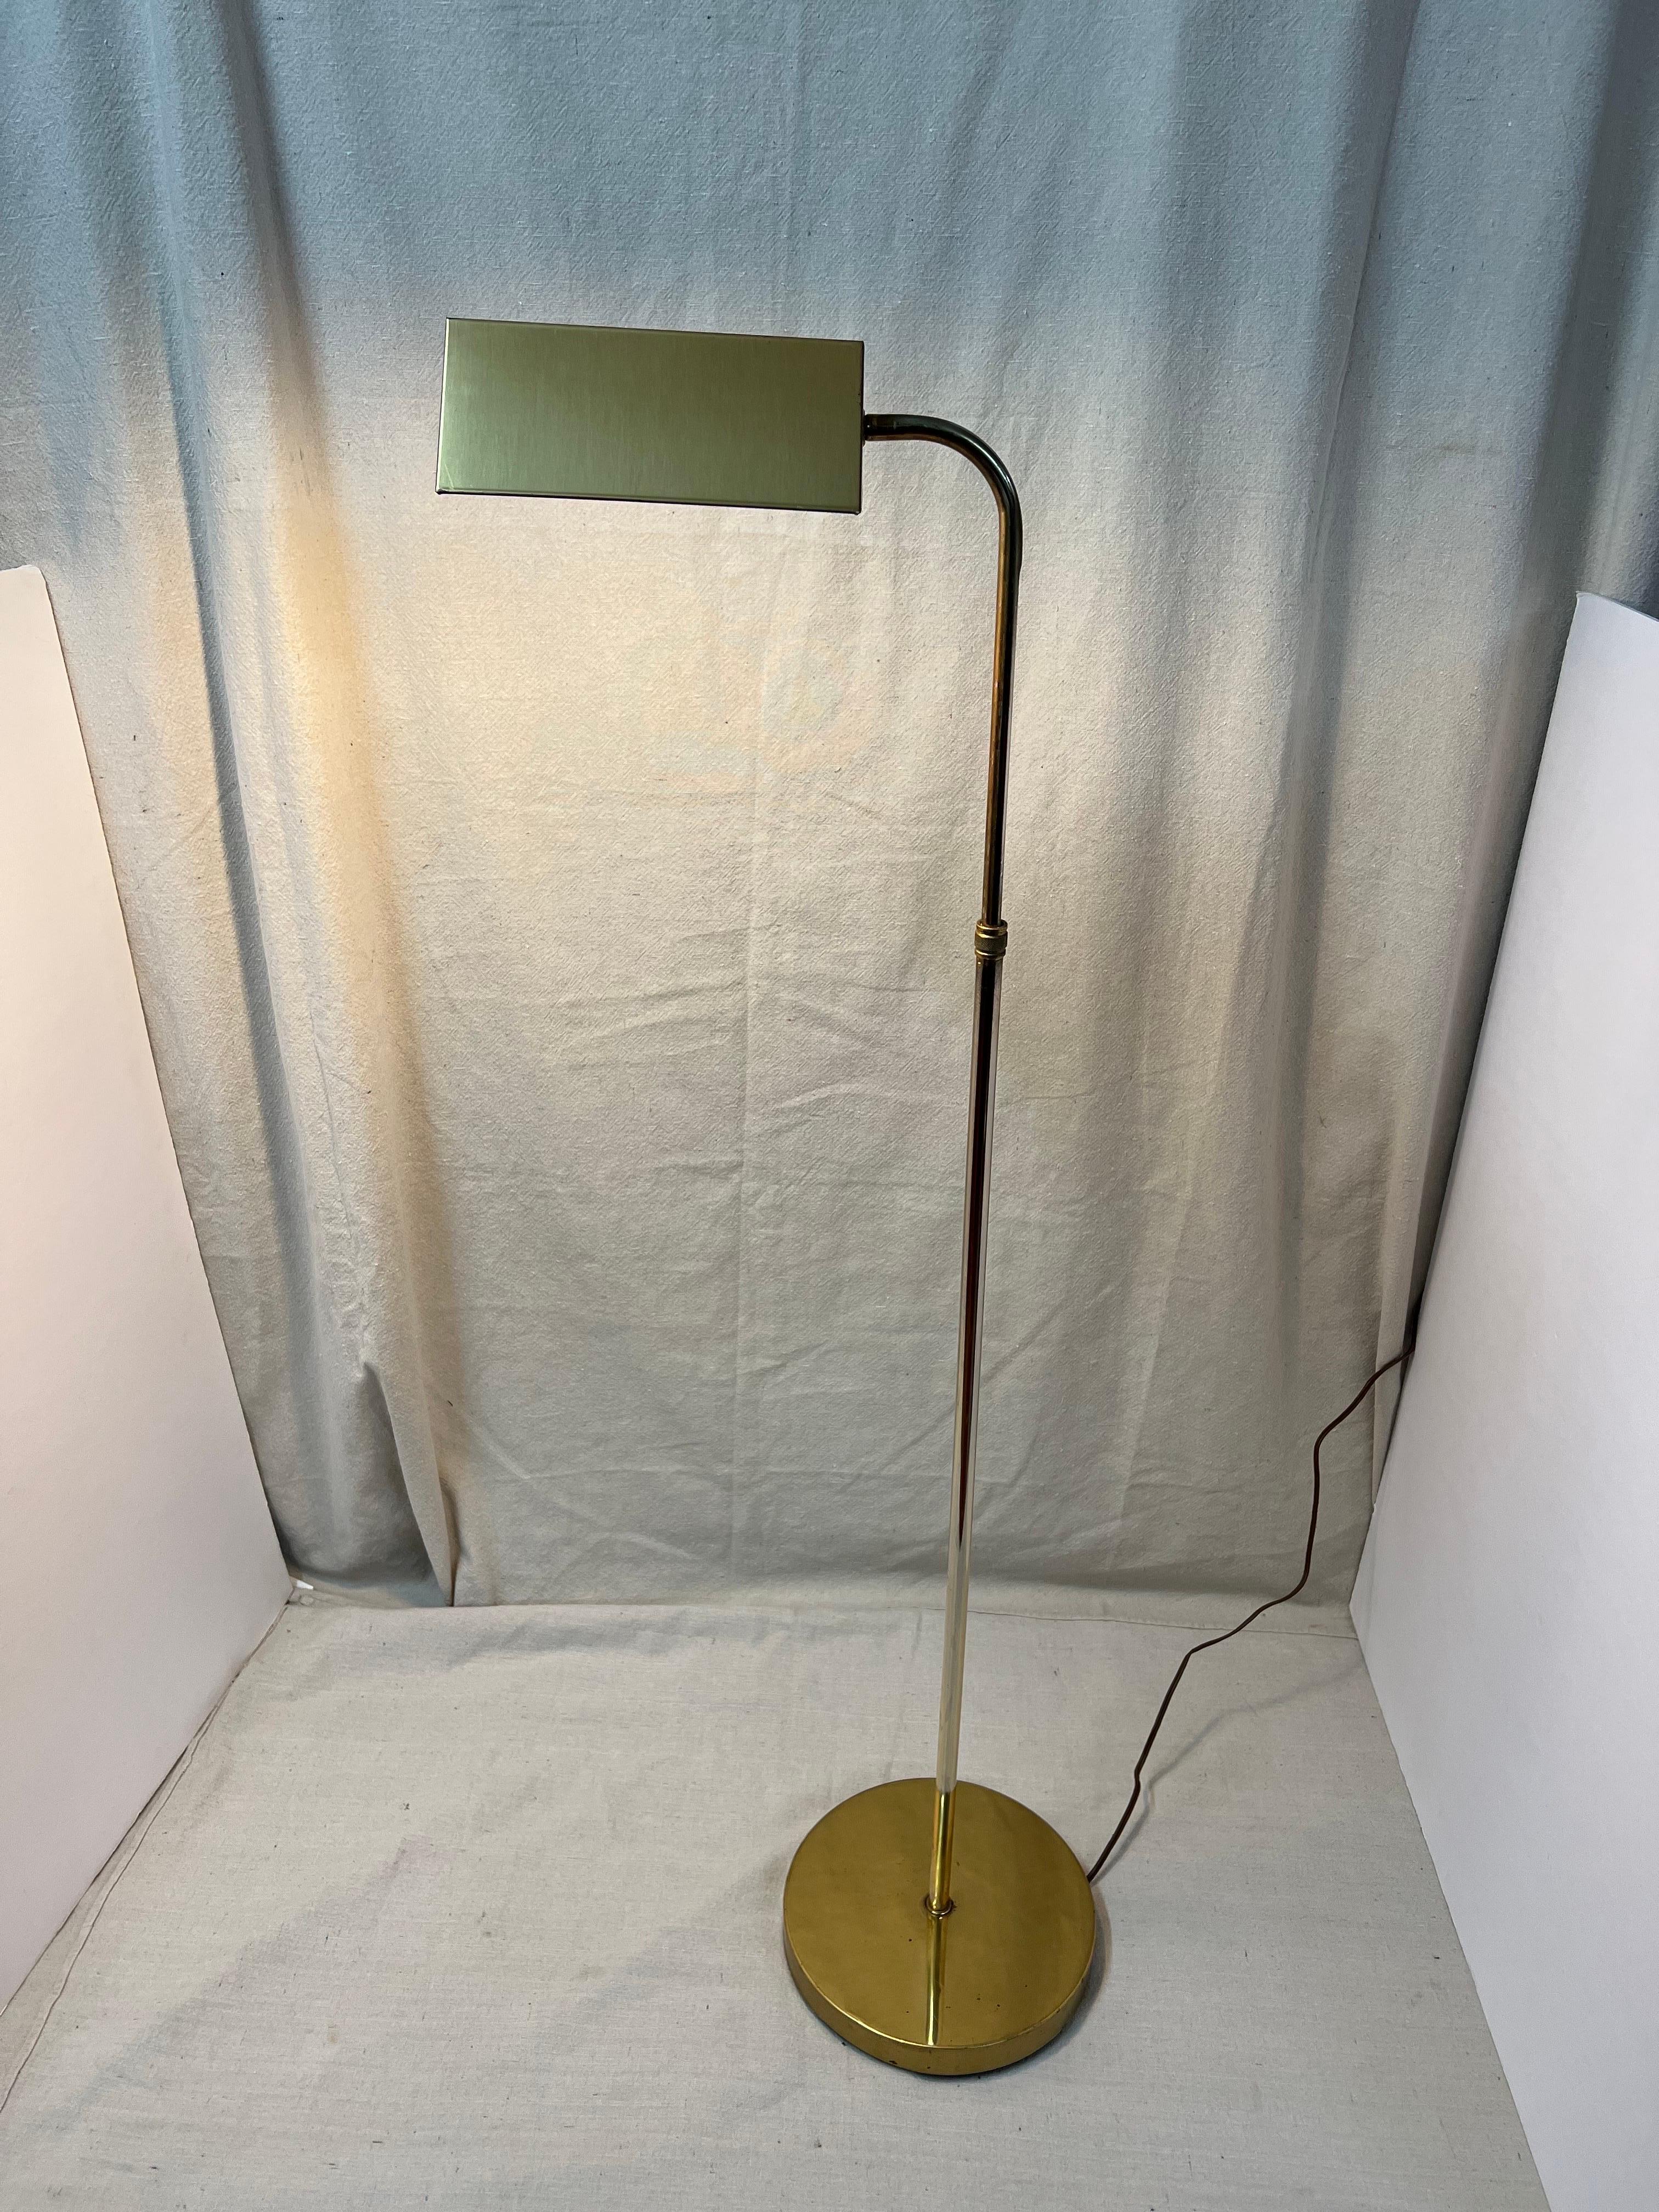 Adjustable Brass Pharmacy Floor Lamp. Great for reading by a chair. Classic, timeless 1970-1980s style. Lamp base diameter is 10